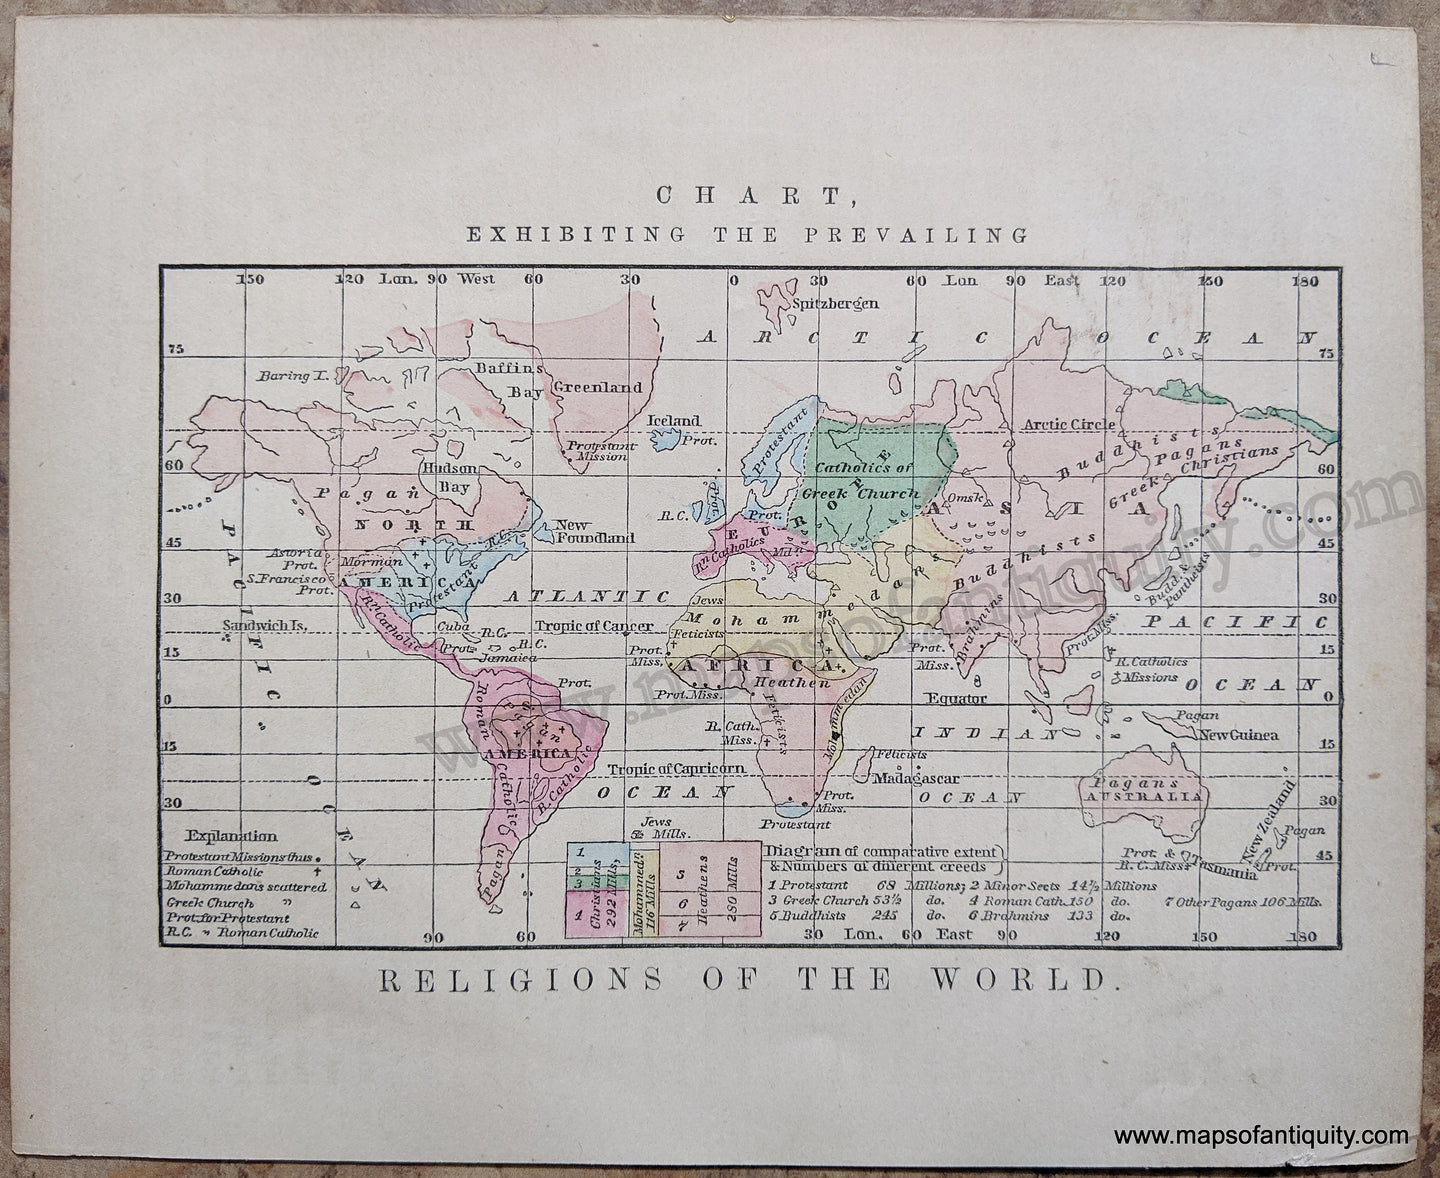 Antique-Hand-Colored-Map-Chart-Exhibiting-the-Prevailing-Religions-of-the-World-World--1857-Morse-and-Gaston-Maps-Of-Antiquity-1800s-19th-century